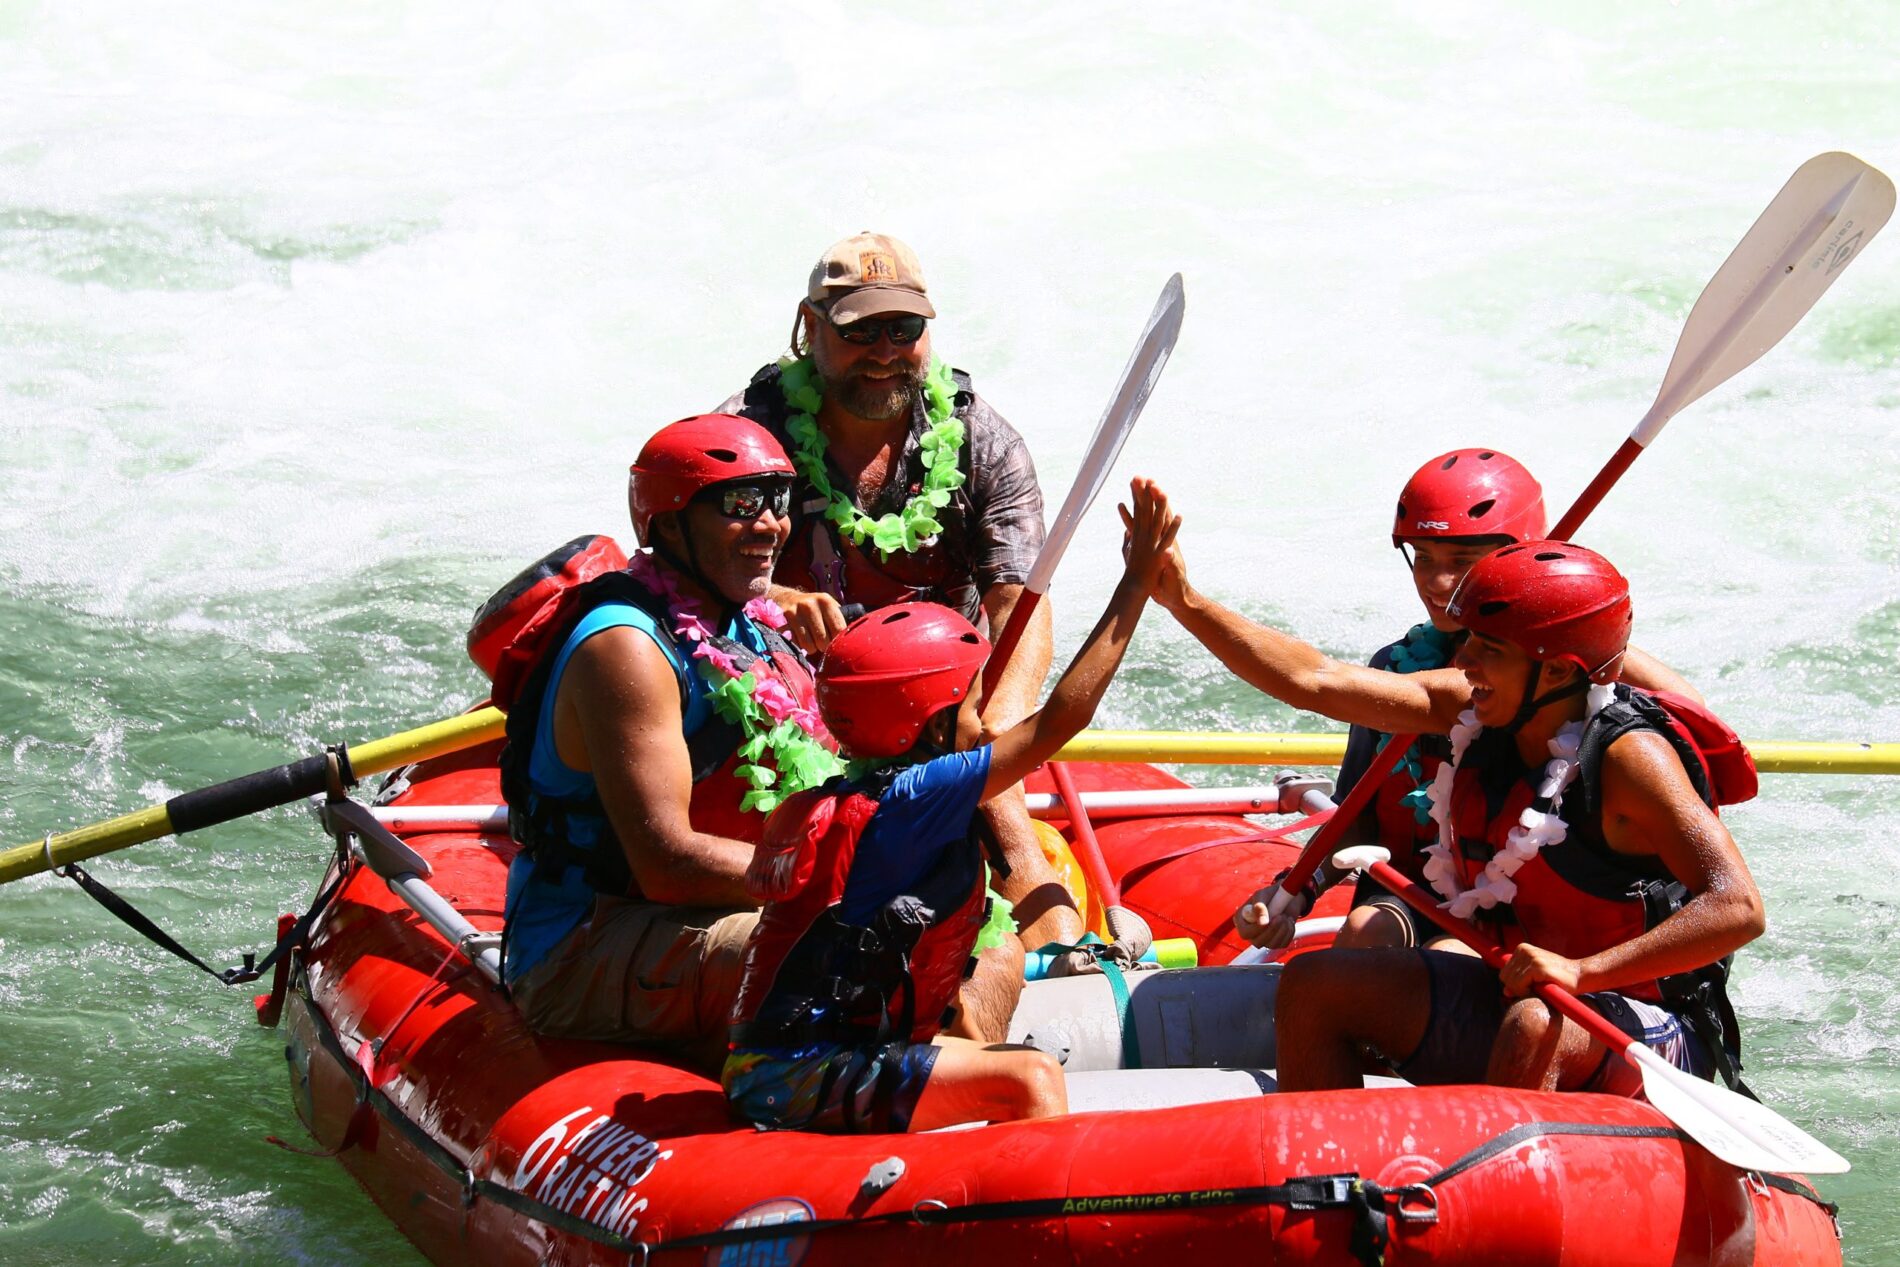 kids high-fiving after a successful rafting trip